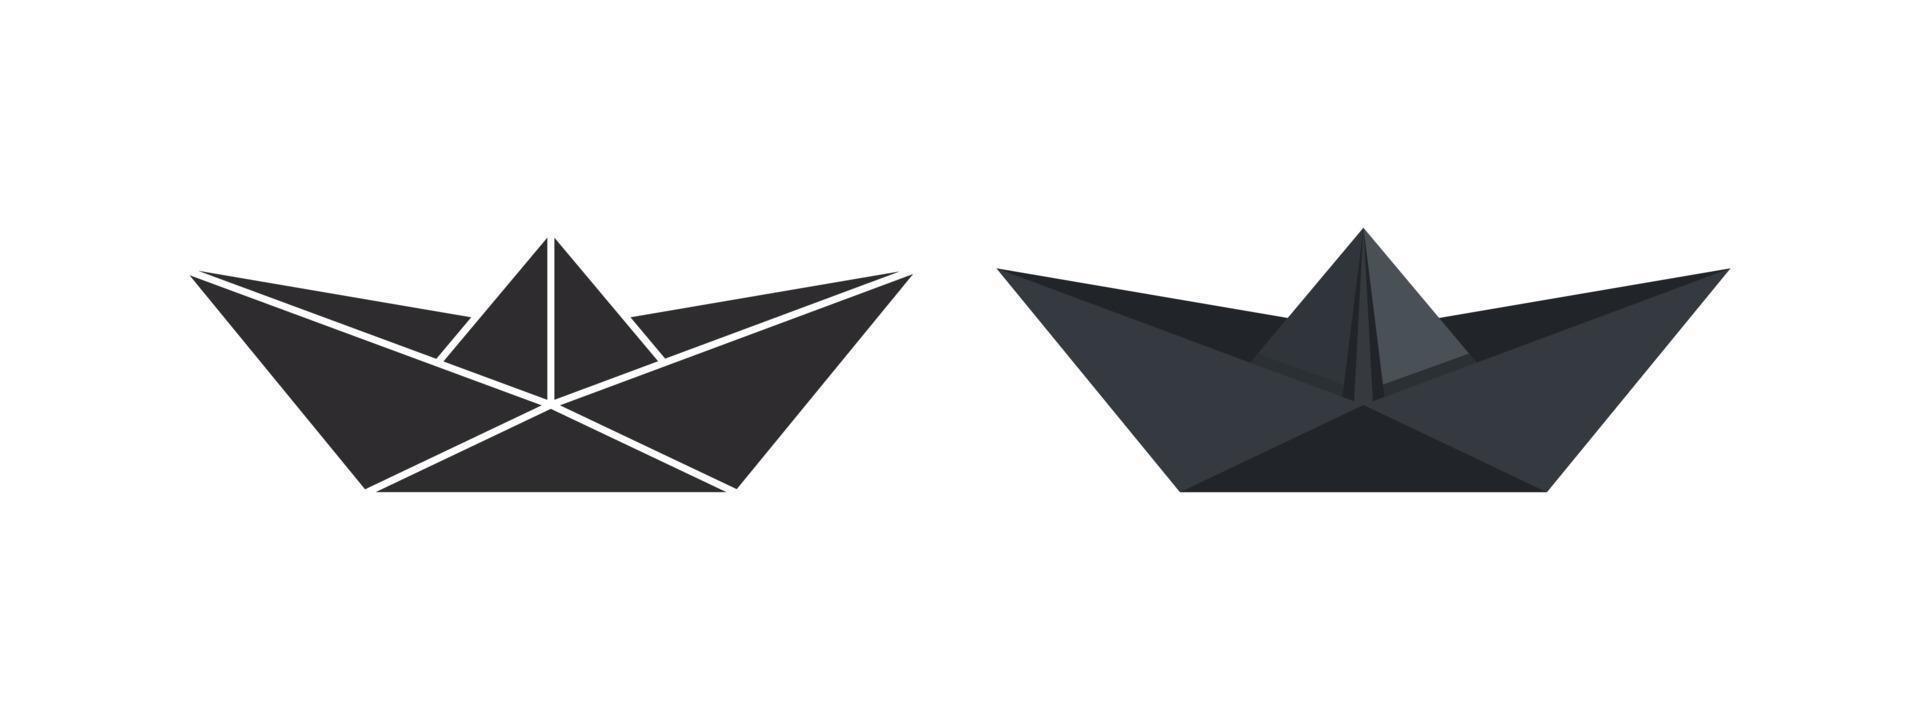 Paper boat. Folded paper boat icons. Origami paper boat. Vector illustration